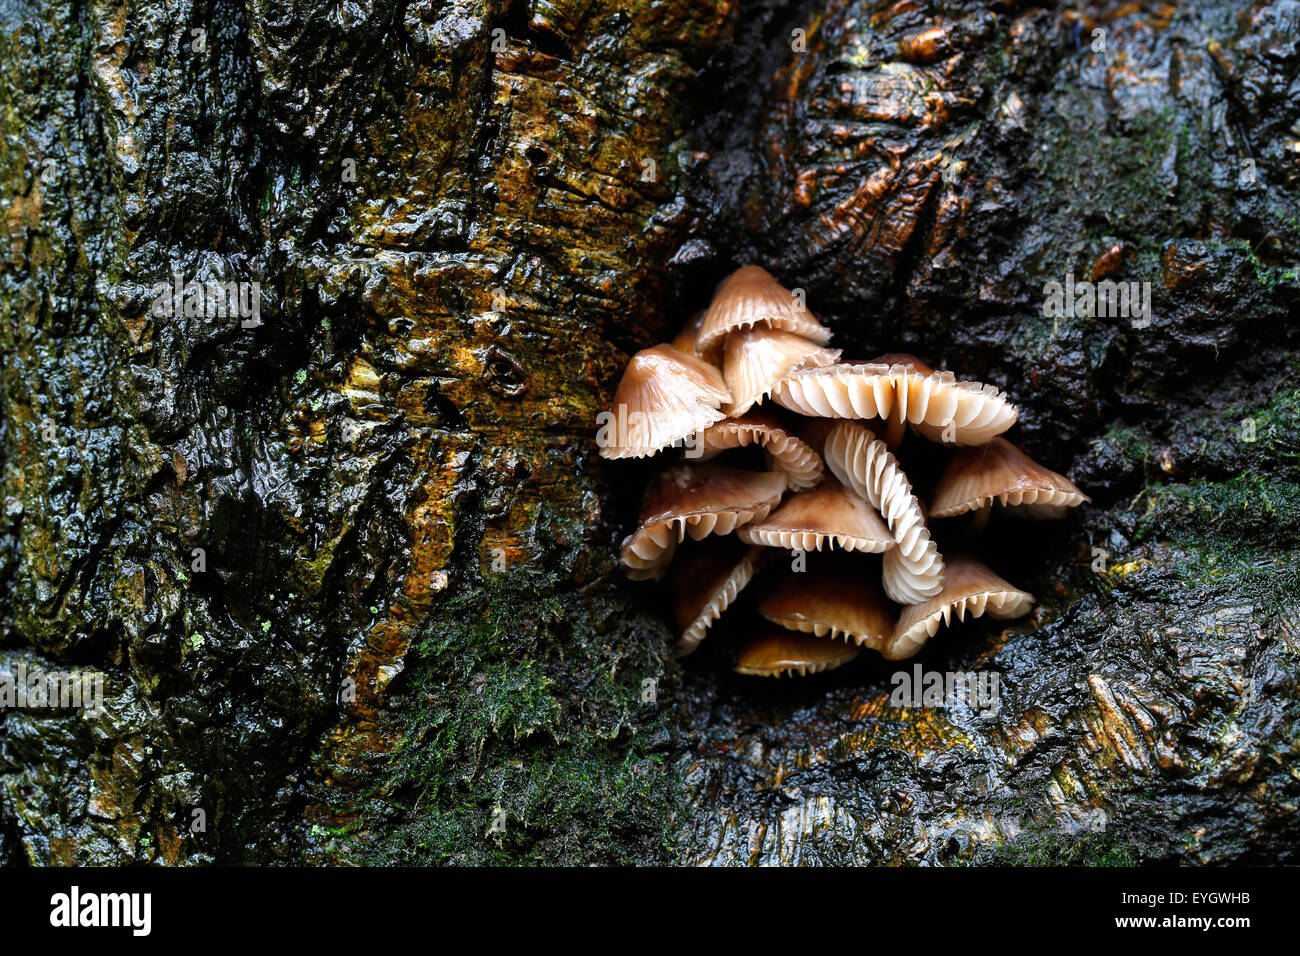 A cluster, or clump, of sulphur tuft mushrooms, Hypholoma fasciculare, growing in a damp, wet tree hollow in an English woodland area Stock Photo